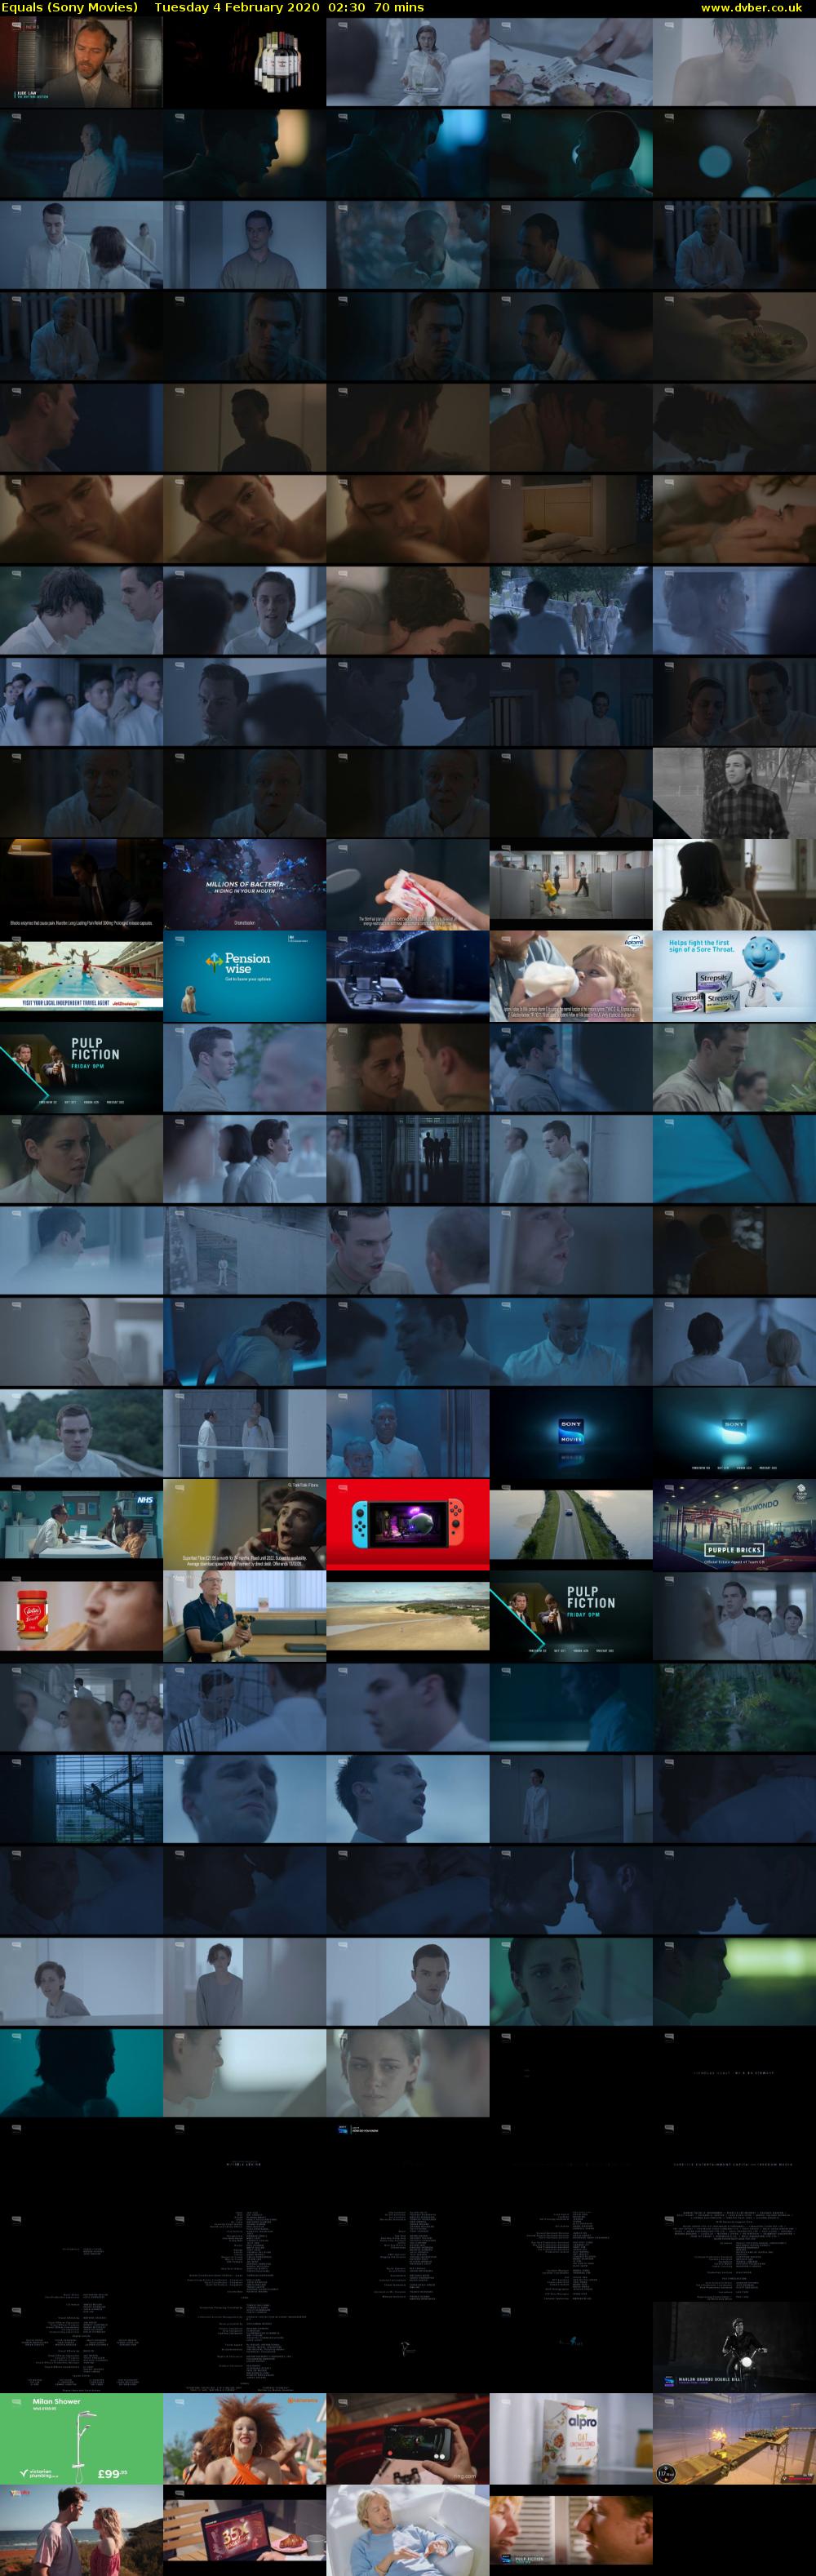 Equals (Sony Movies) Tuesday 4 February 2020 02:30 - 03:40